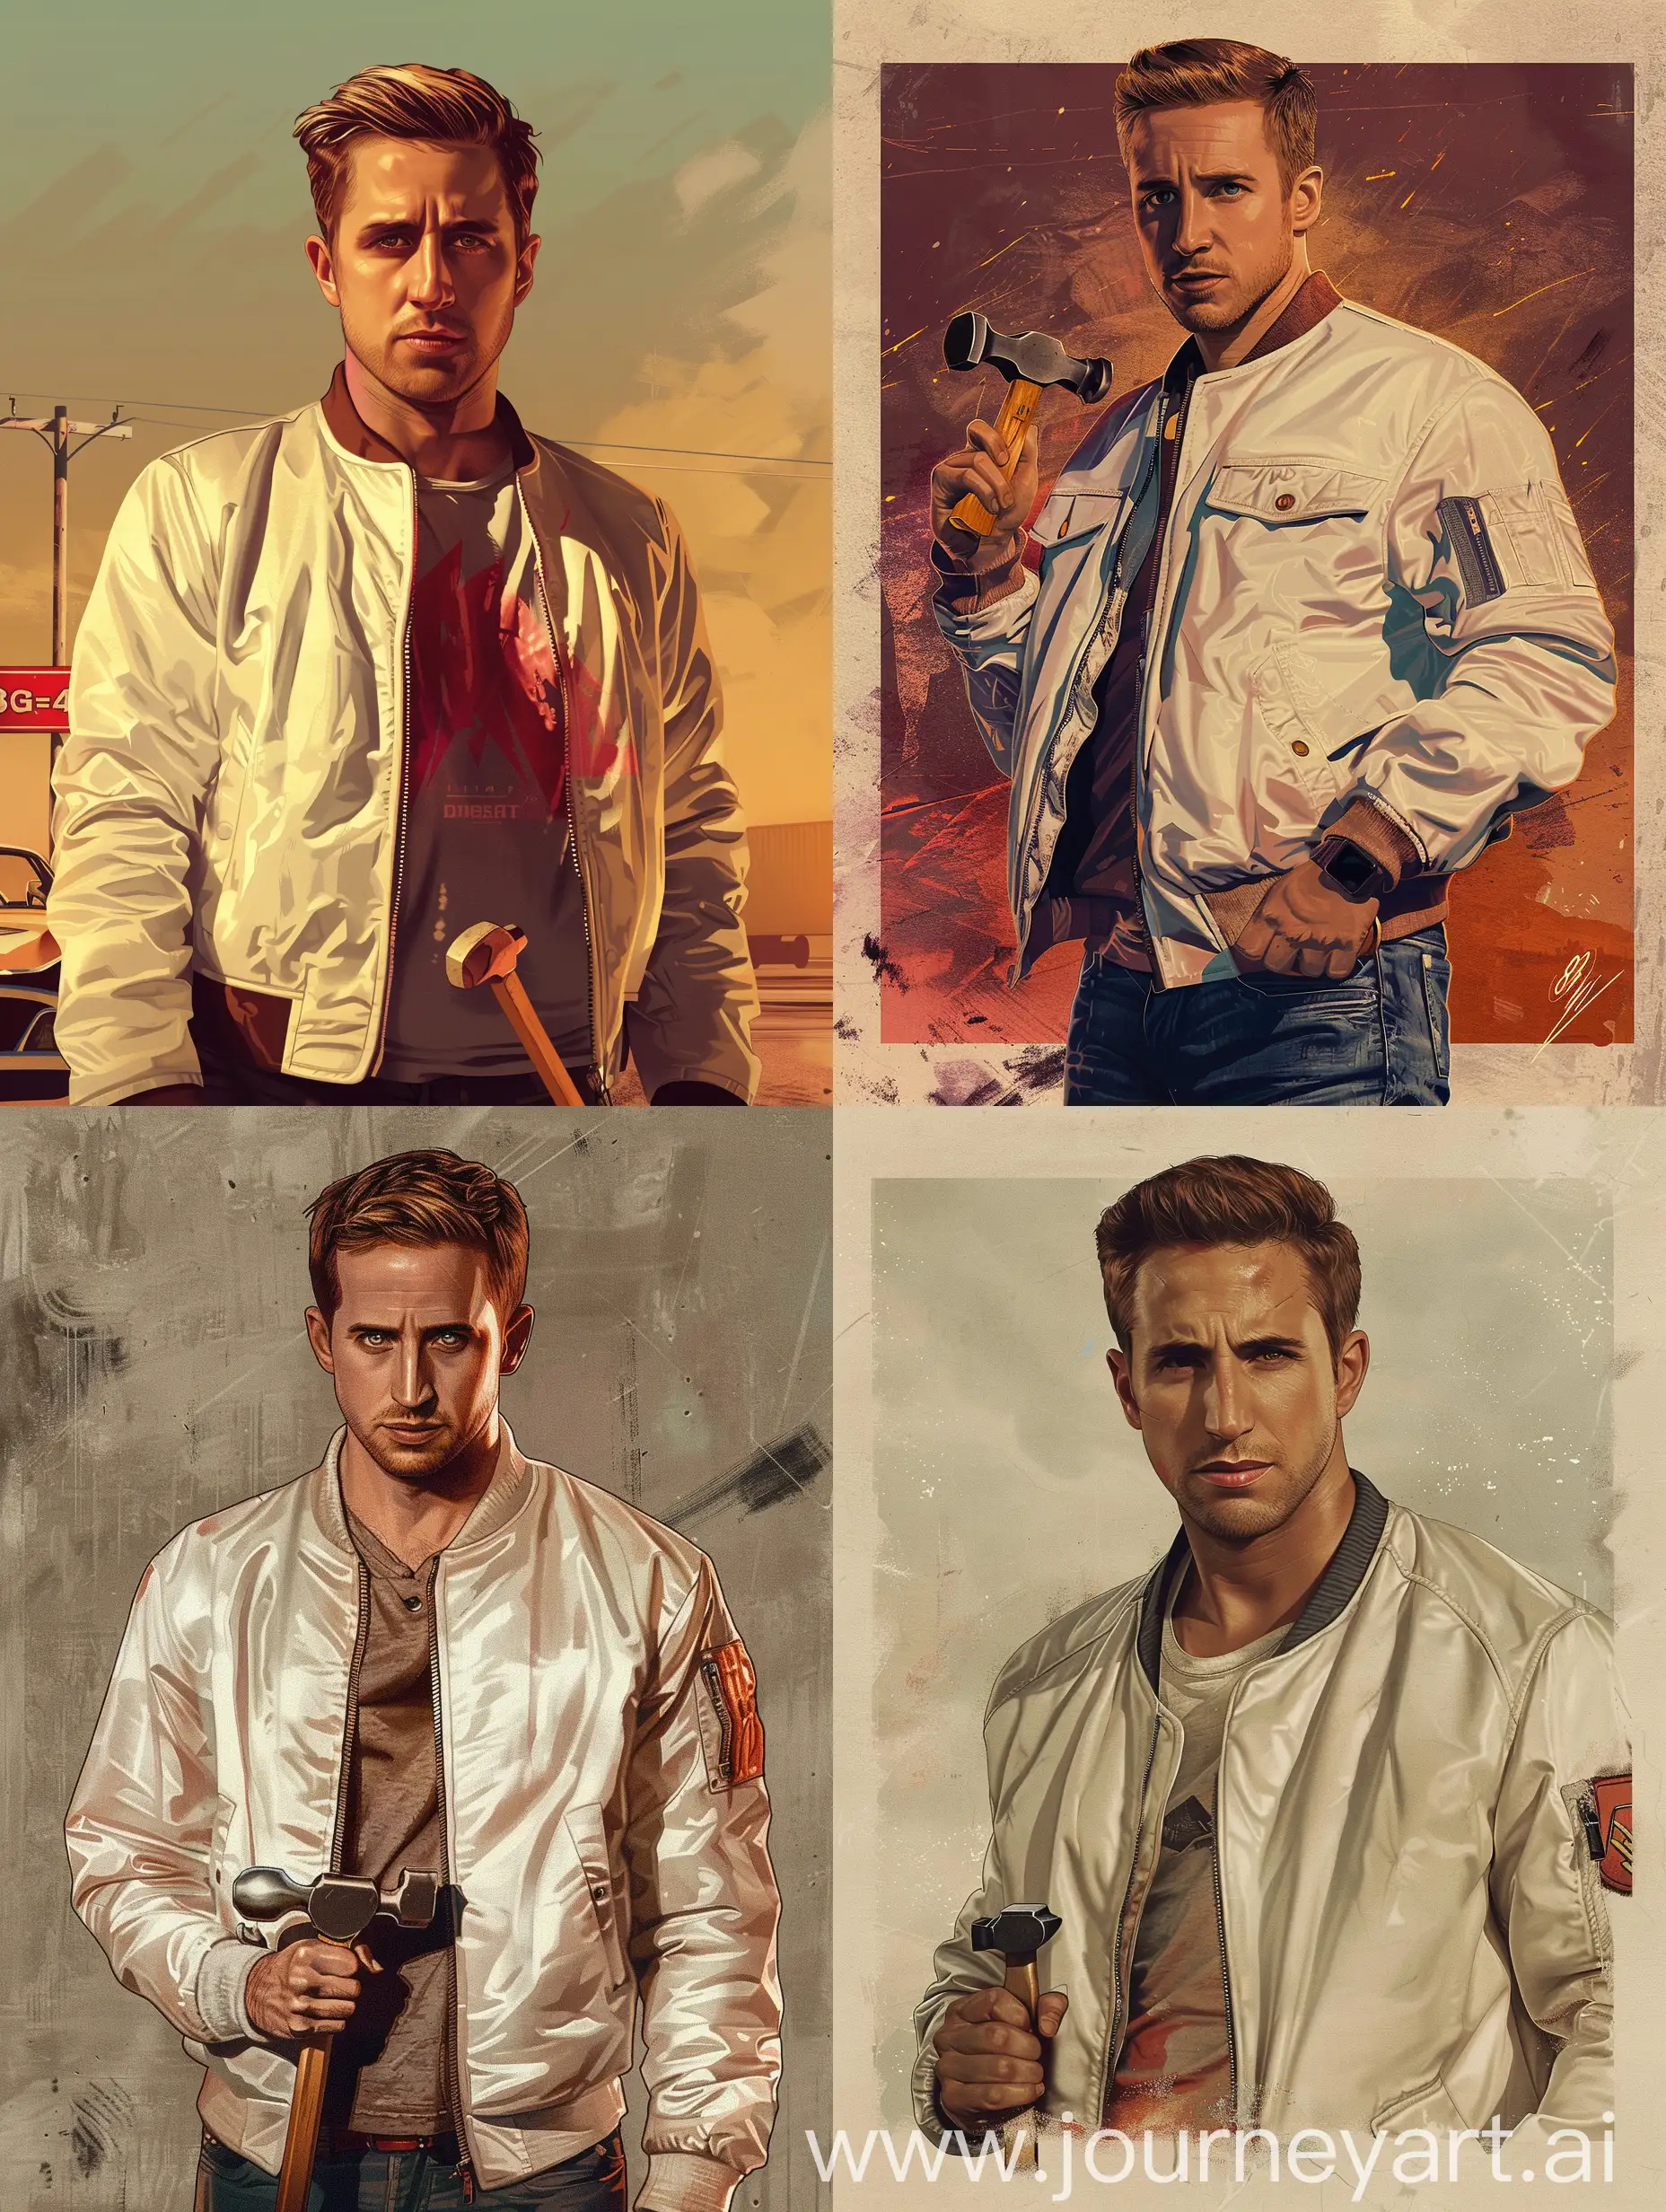 Ryan-Gosling-DriveInspired-Poster-Urban-Coolness-with-Stylized-GTA-4-Vibe